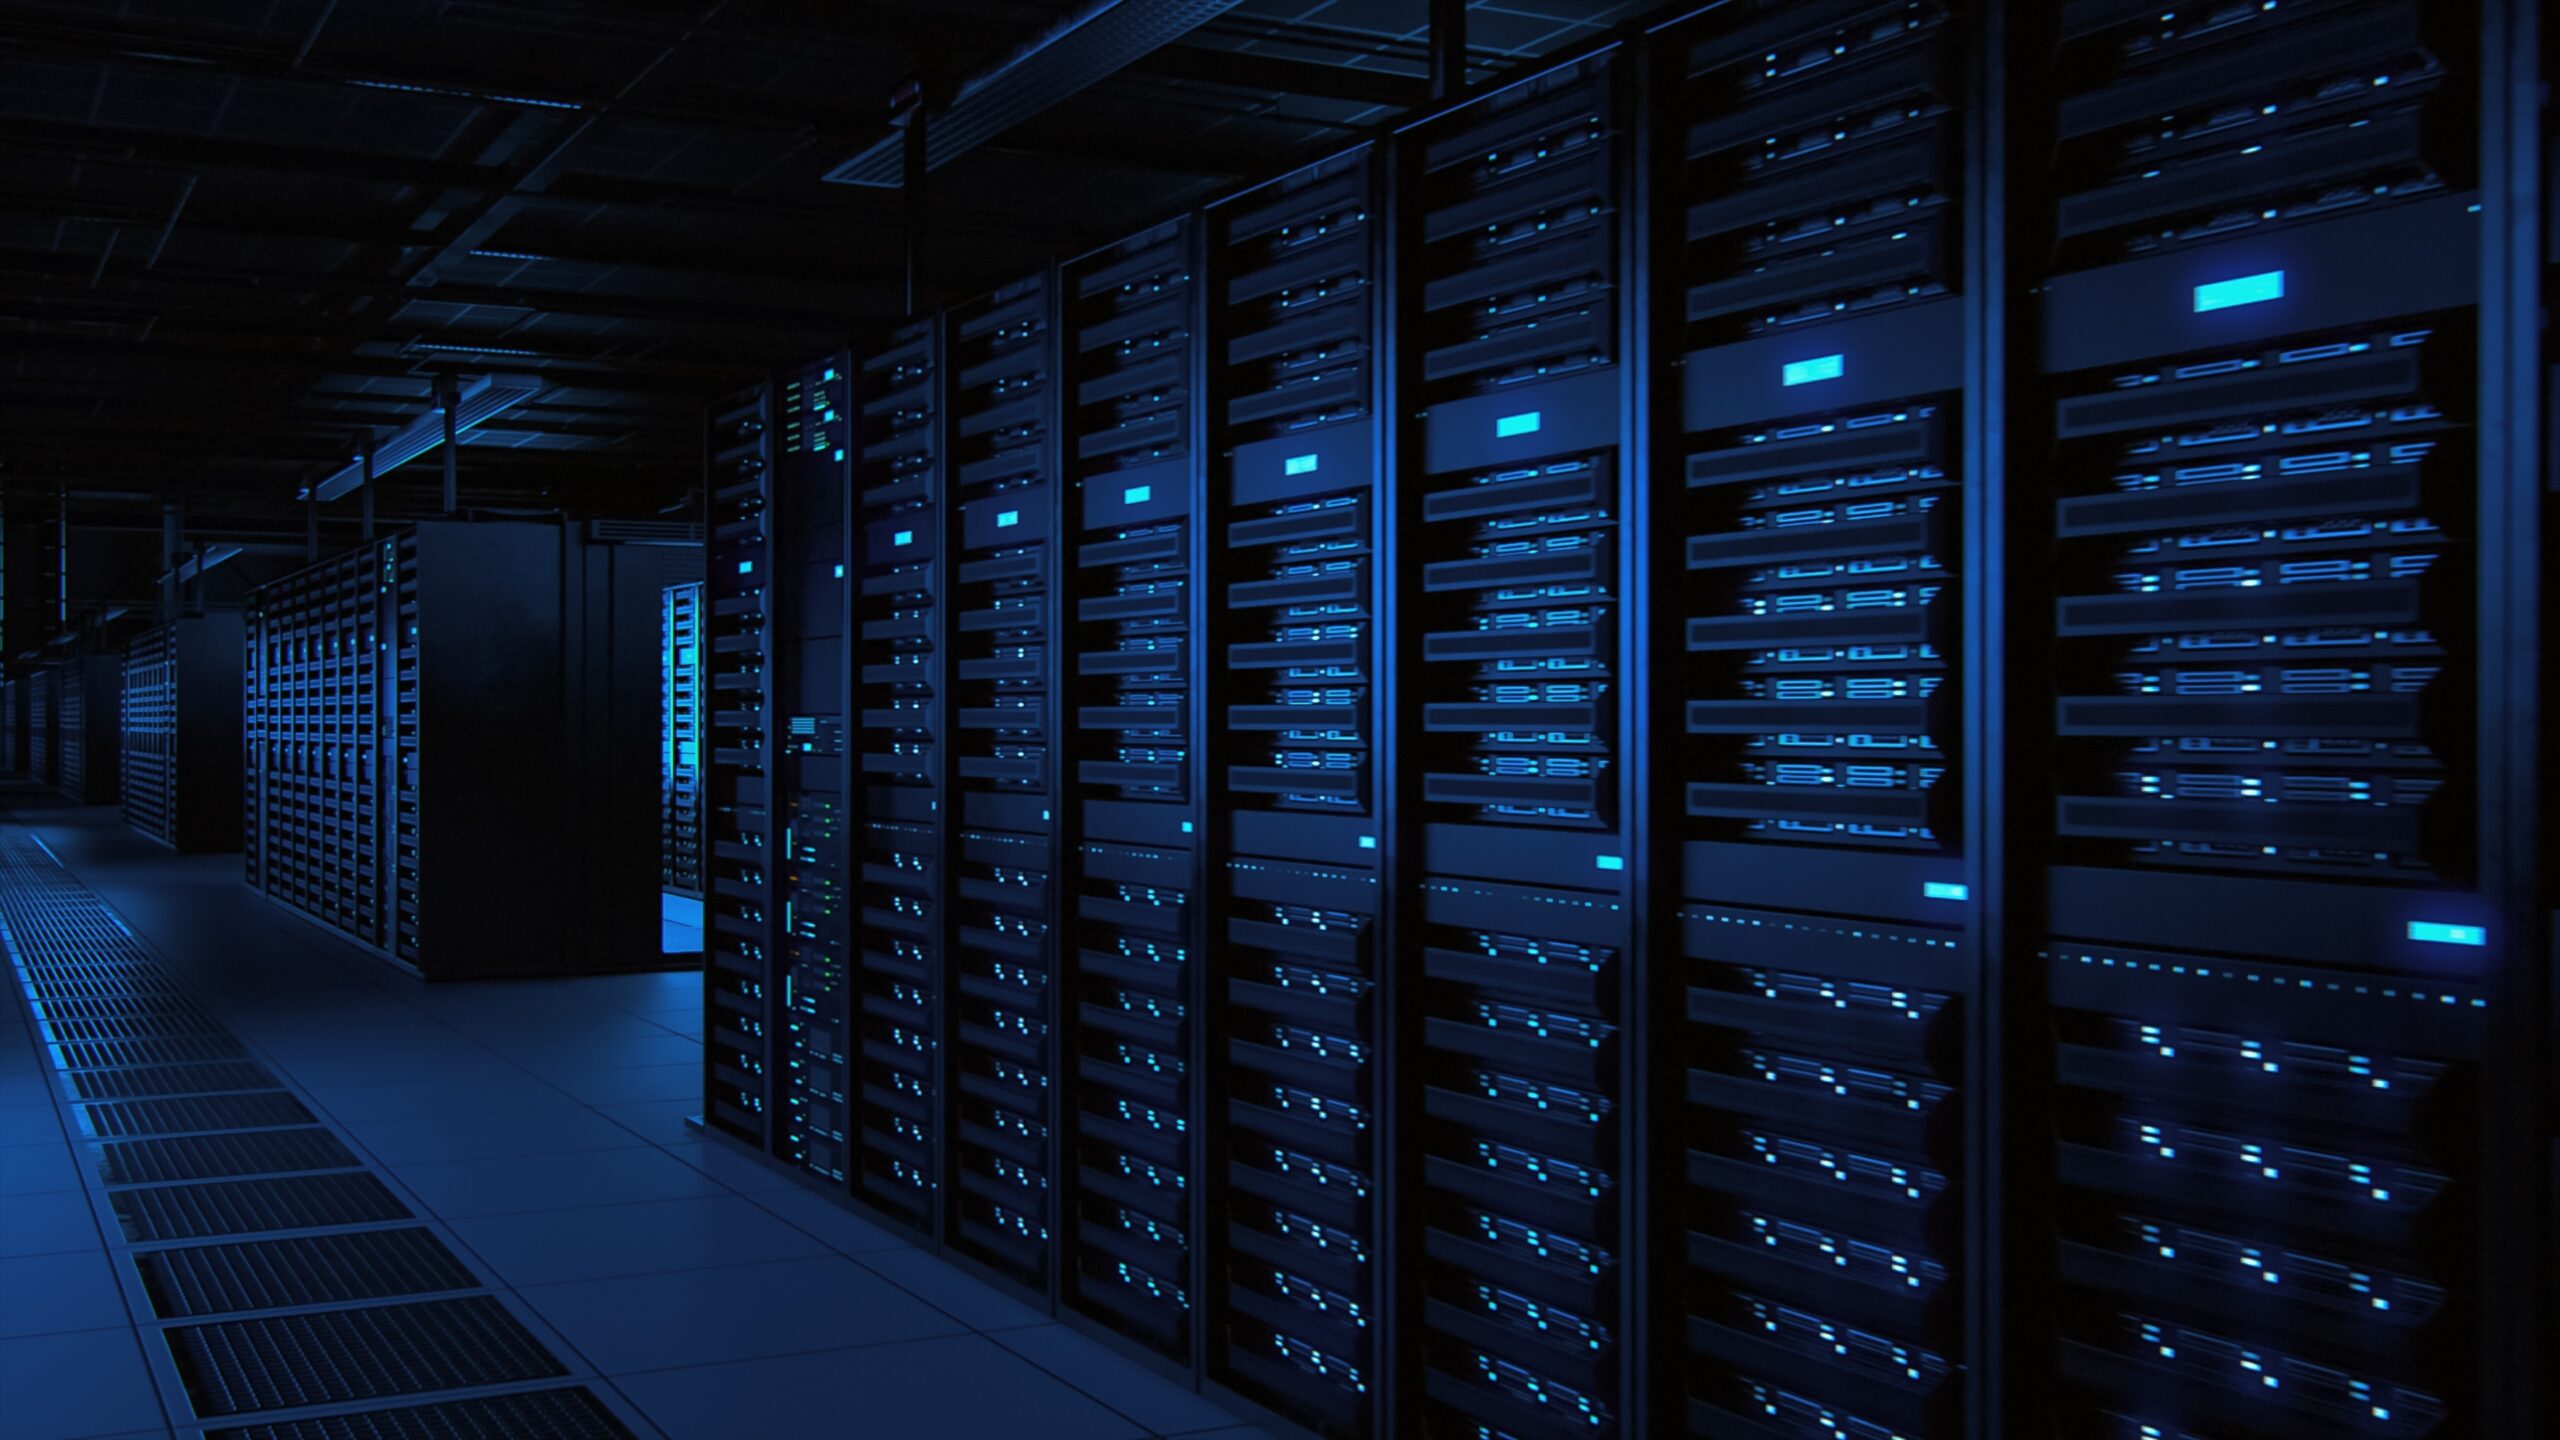 A dimly lit data center with rows of server racks illuminated by blue LED lights, extending into the distance. Each rack is filled with multiple servers, and the floor has ventilation grates. The setup gives an organized and futuristic appearance. - CSA Catapult